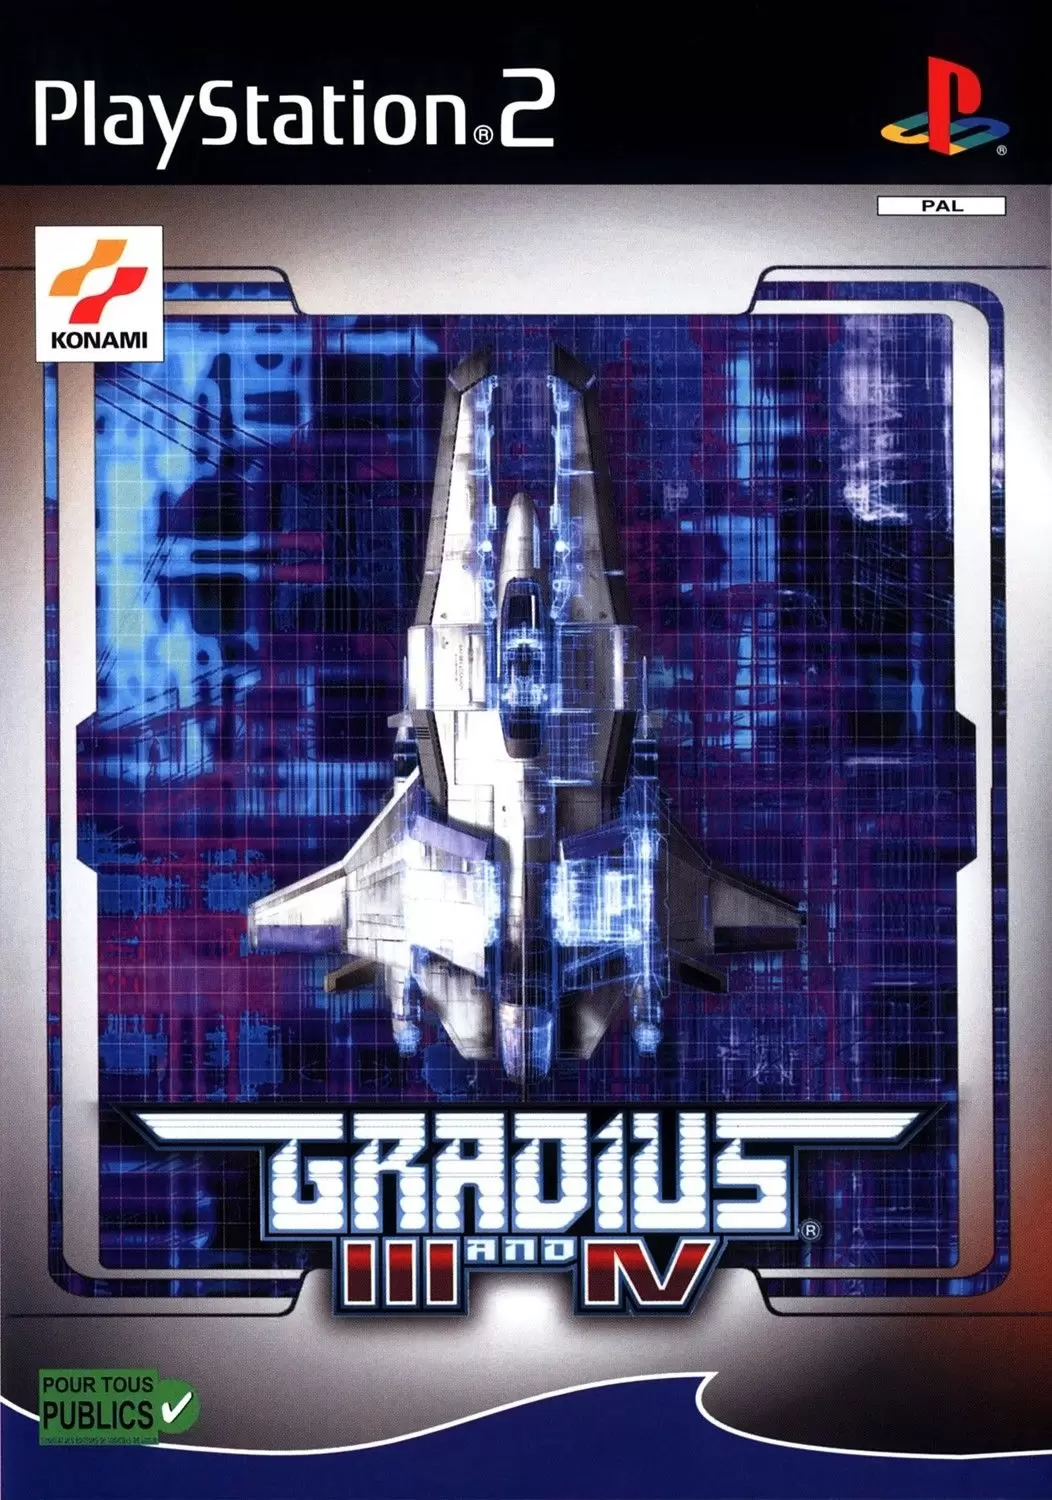 PS2 Games - Gradius III and IV